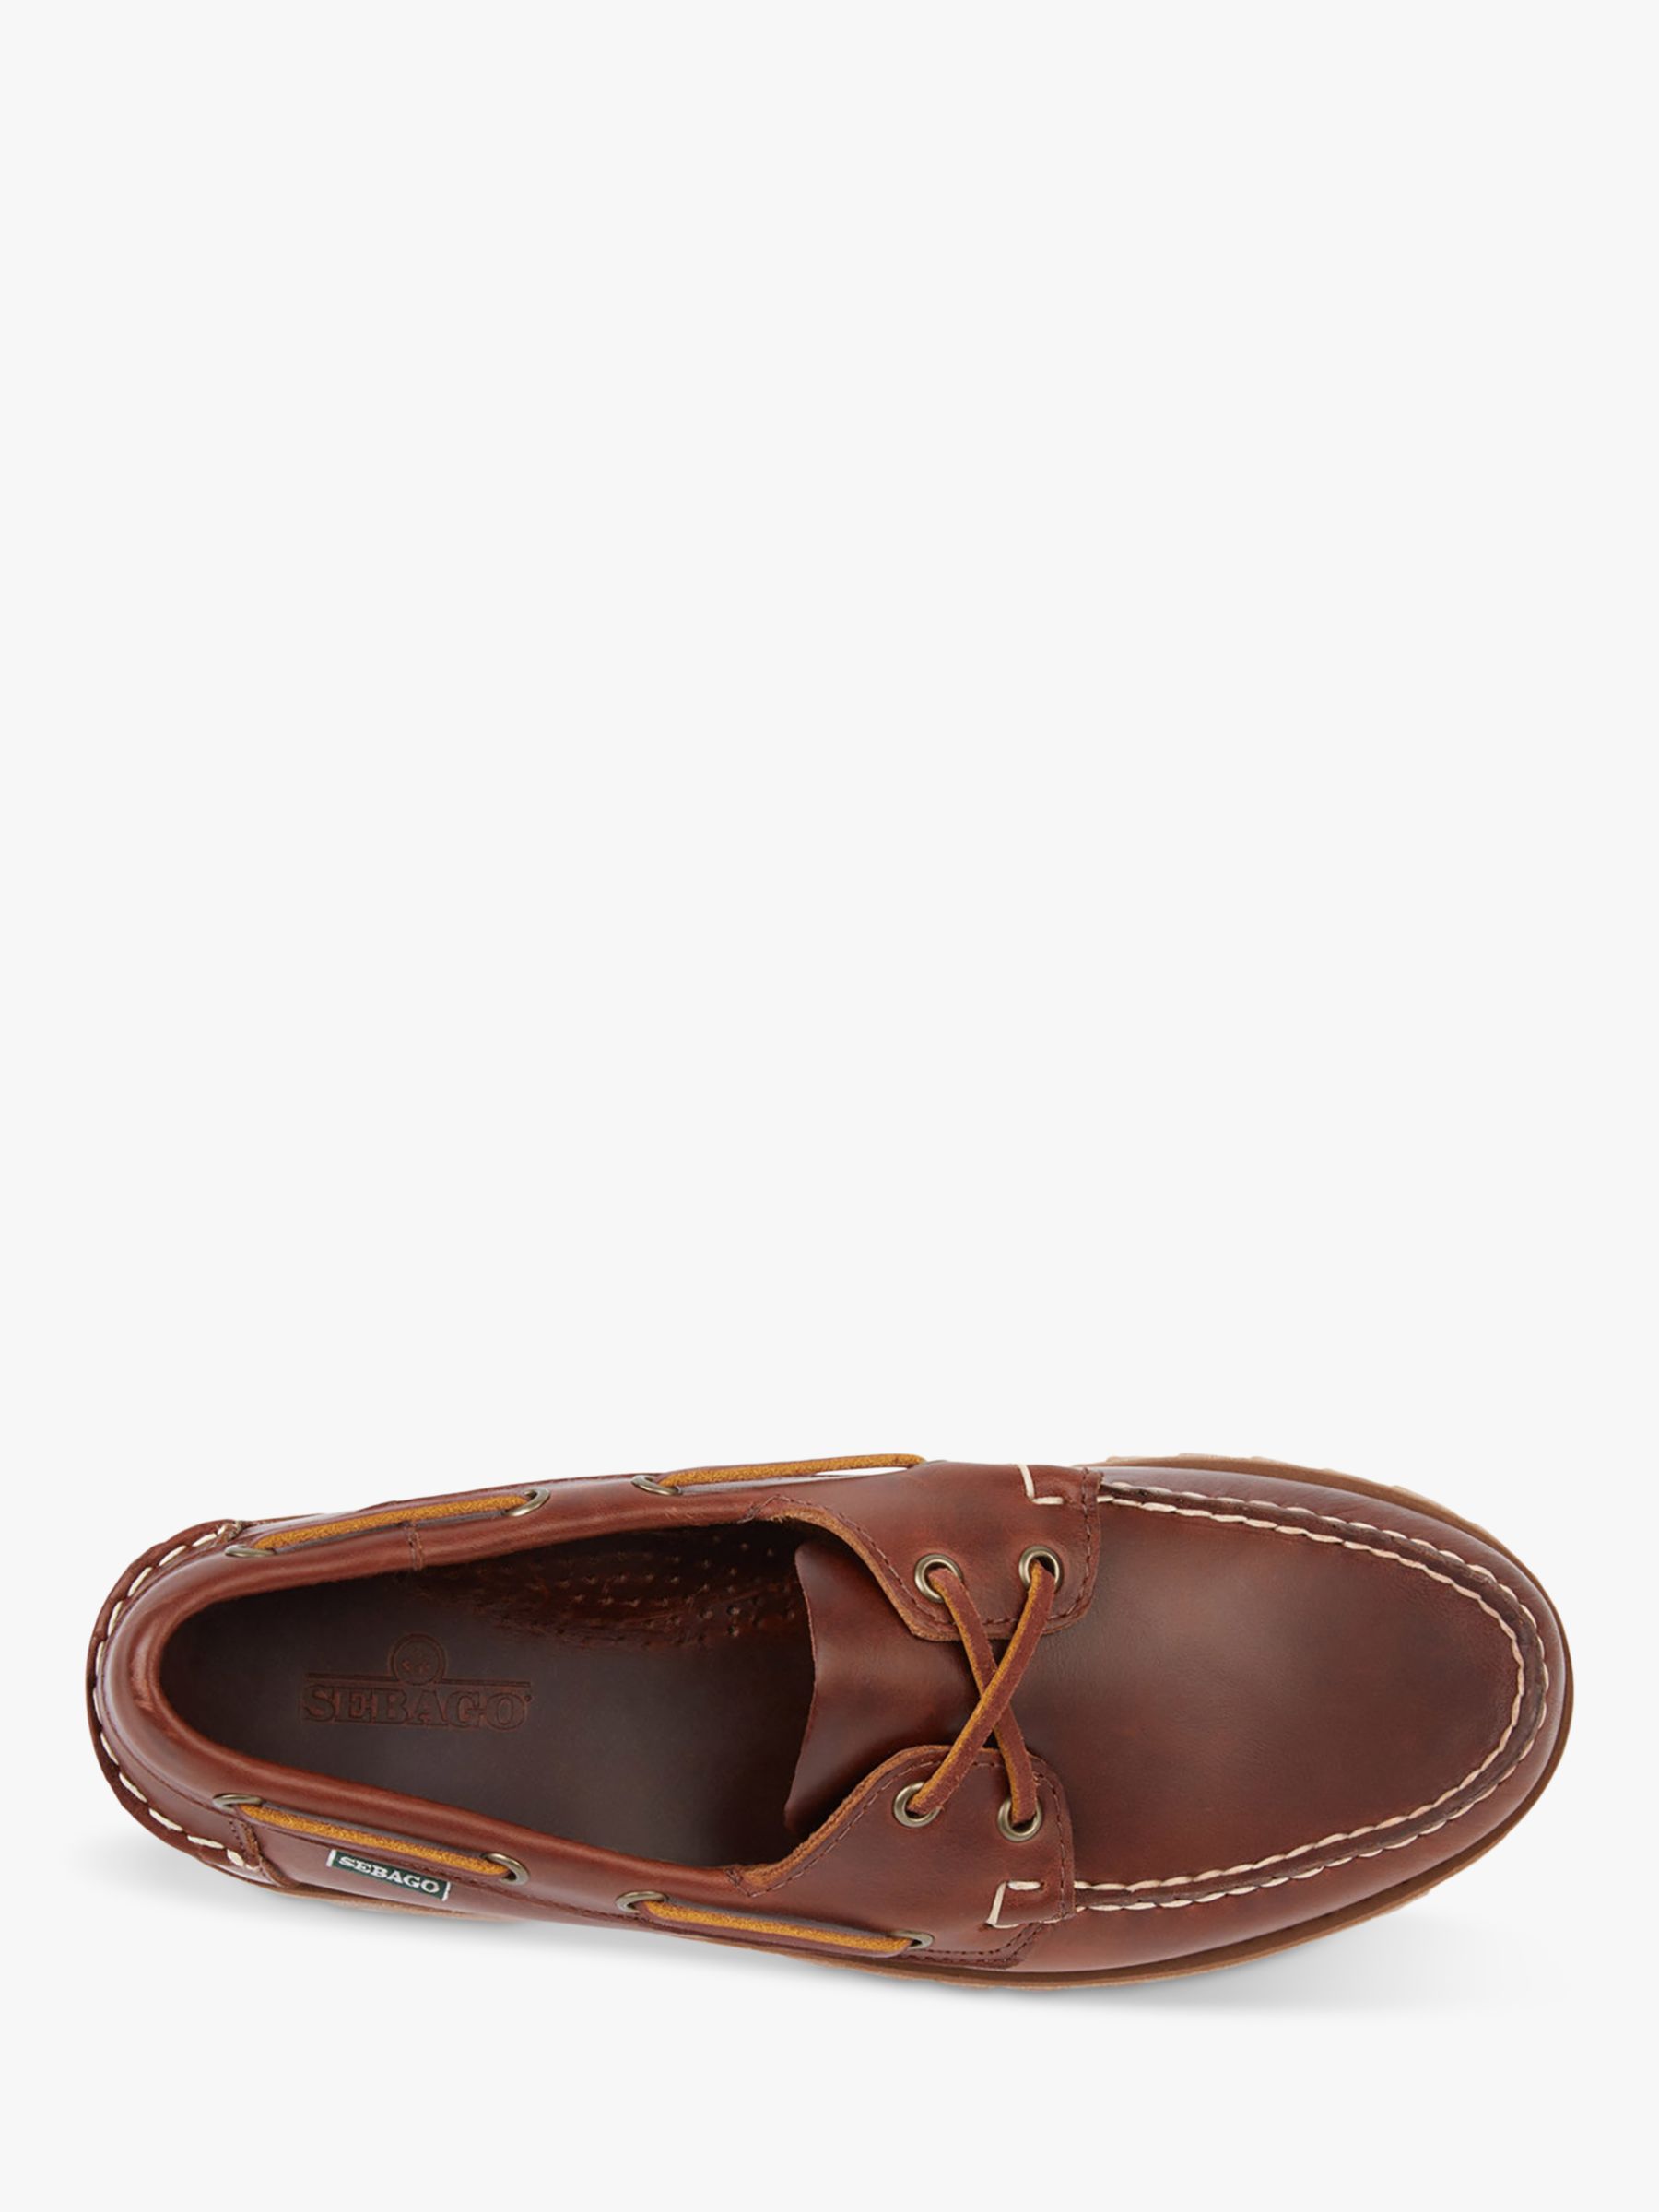 Buy Sebago Ranger Waxy Leather Boat Shoes Online at johnlewis.com